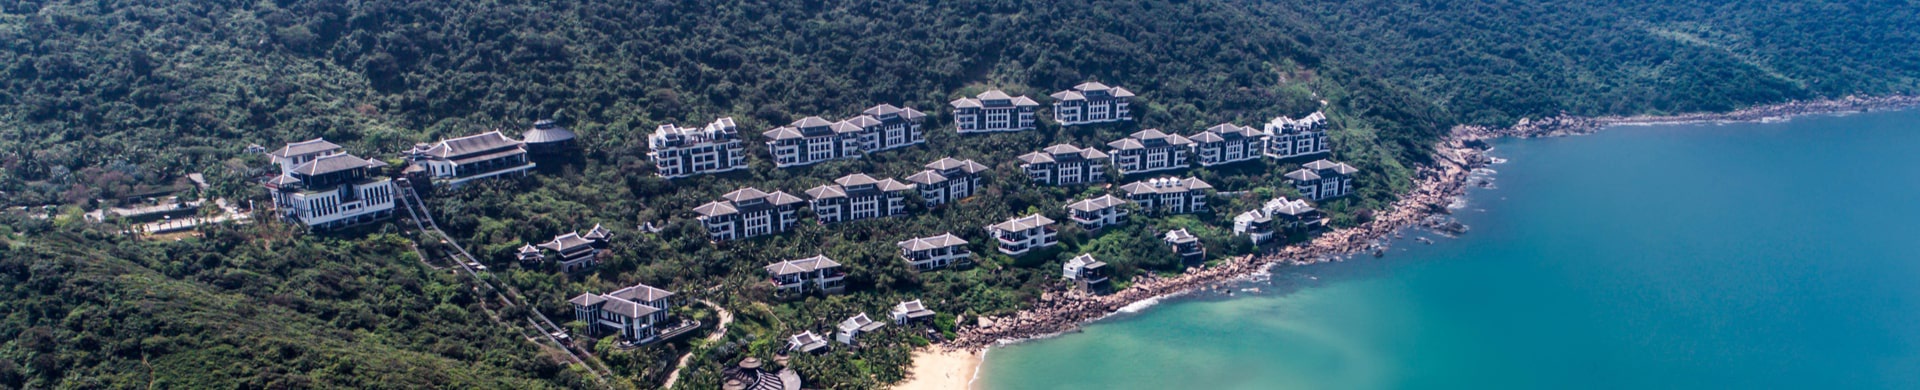 6 Things We Love About InterContinental Danang